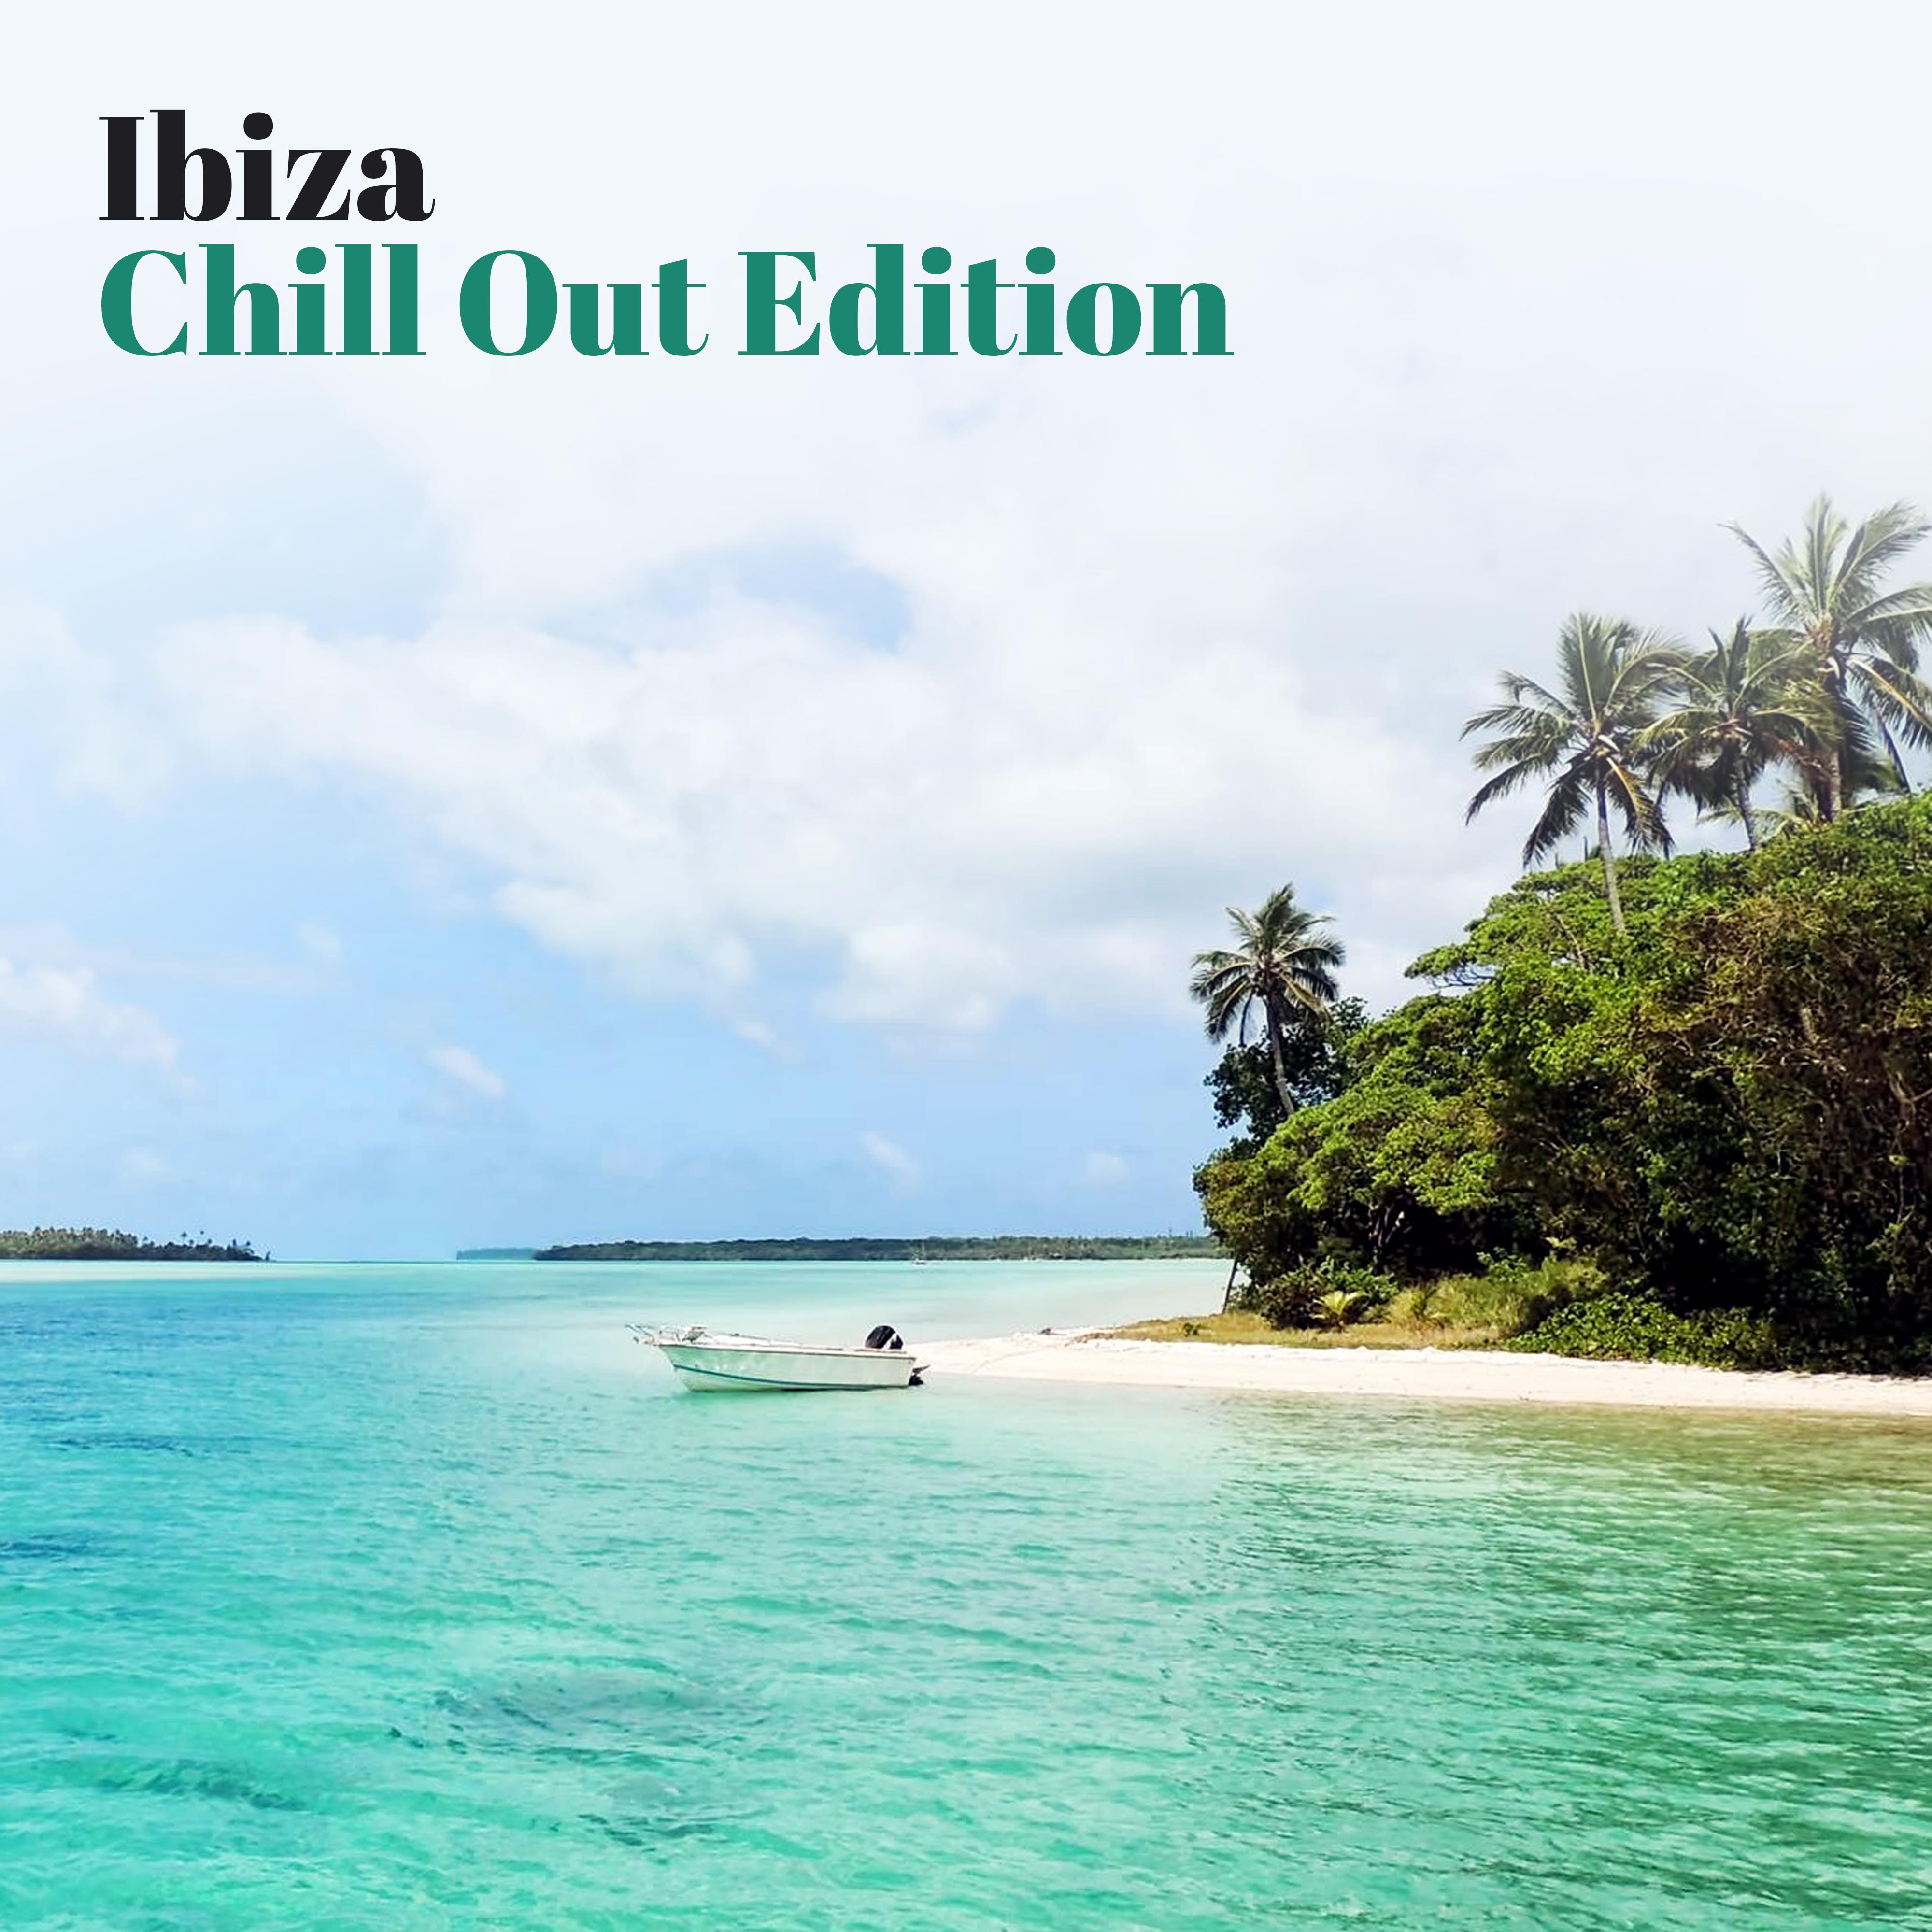 Ibiza Chill Out Edition